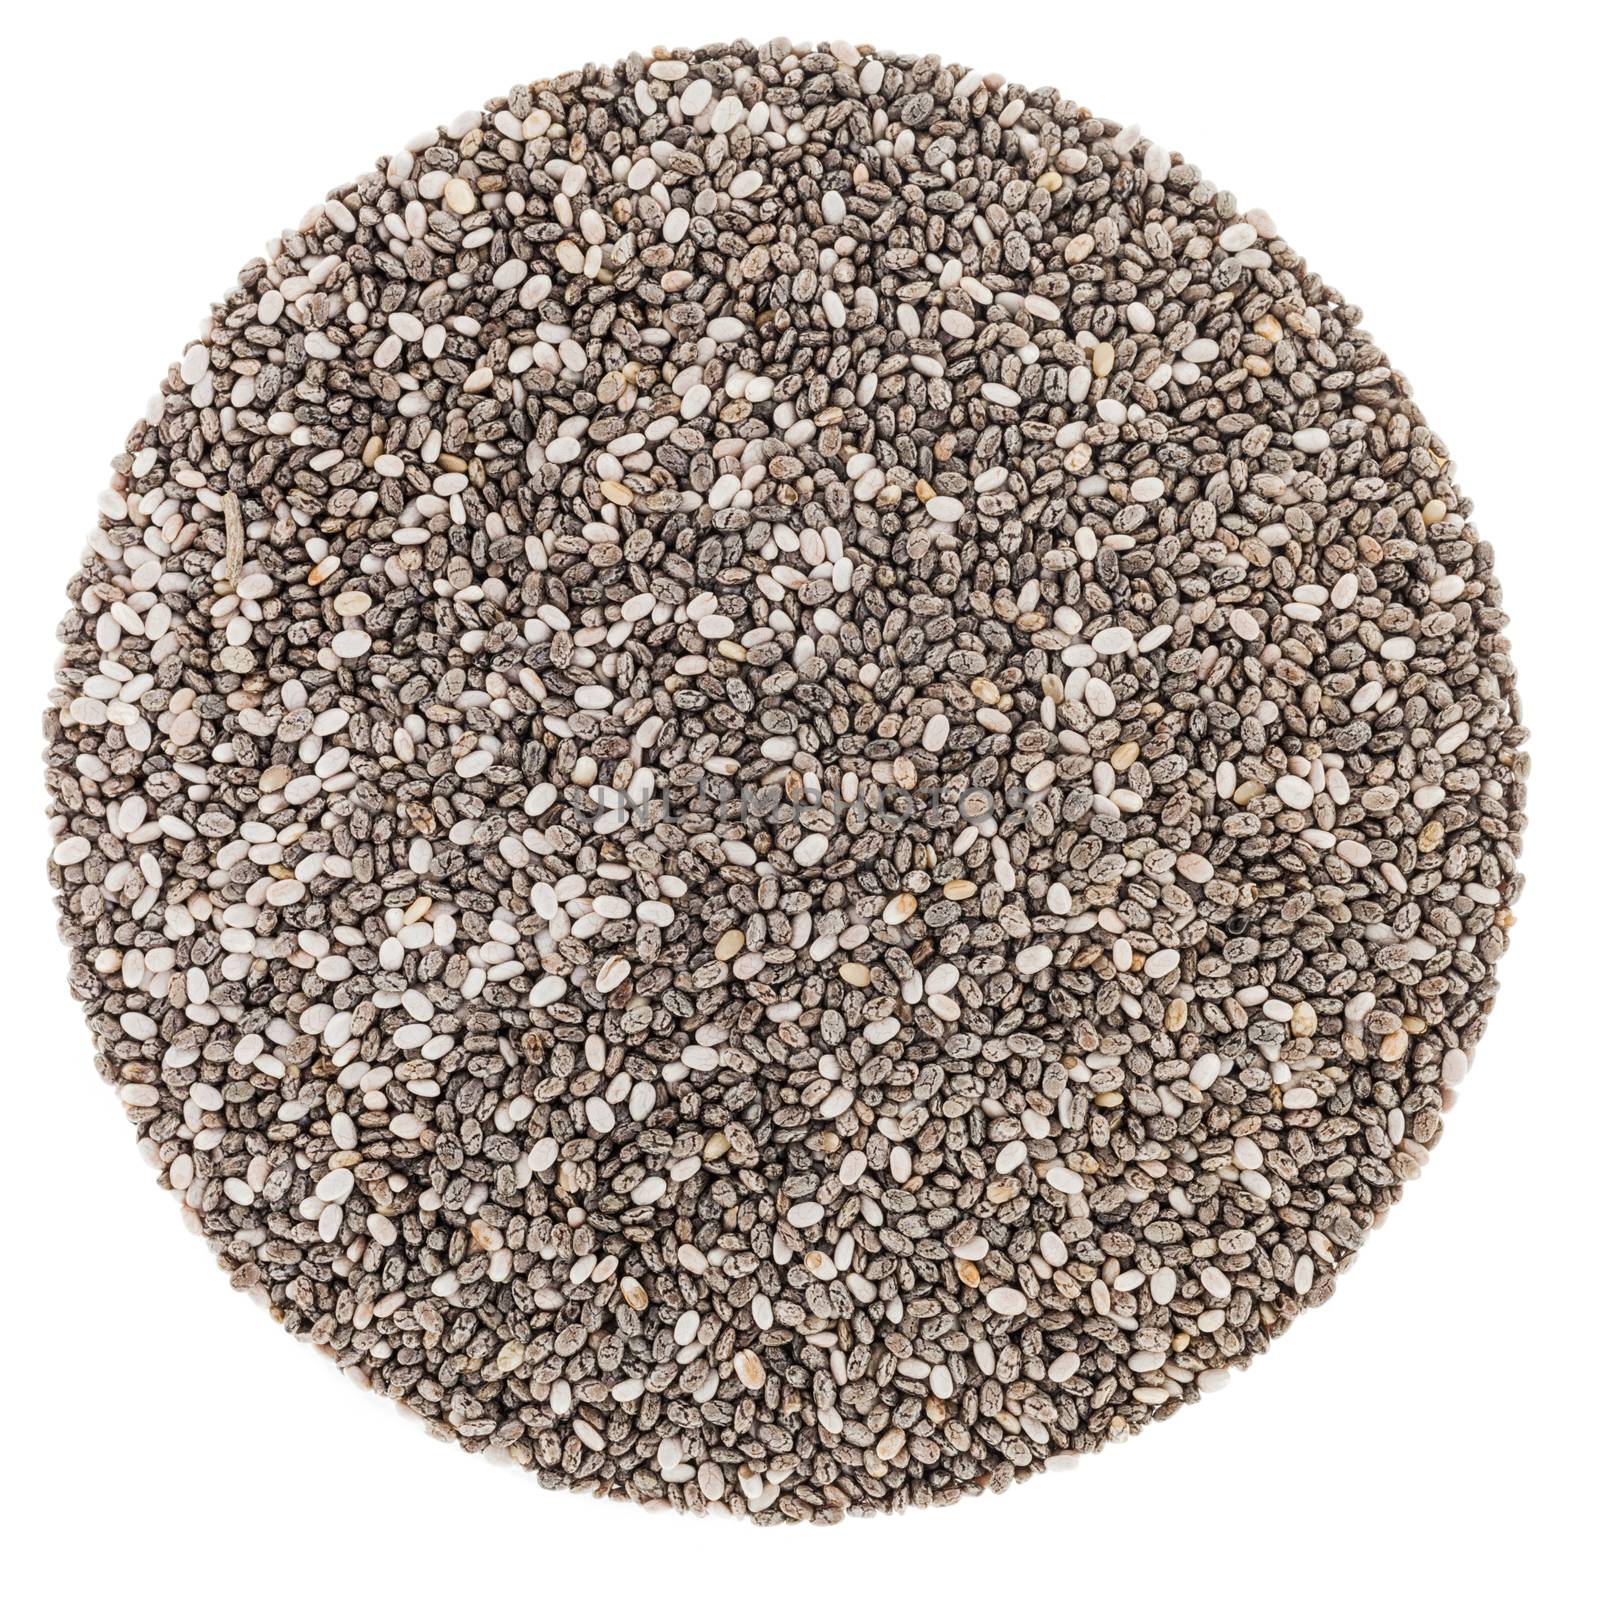 Perfect Circle of Chia Seeds Isolated on White Background